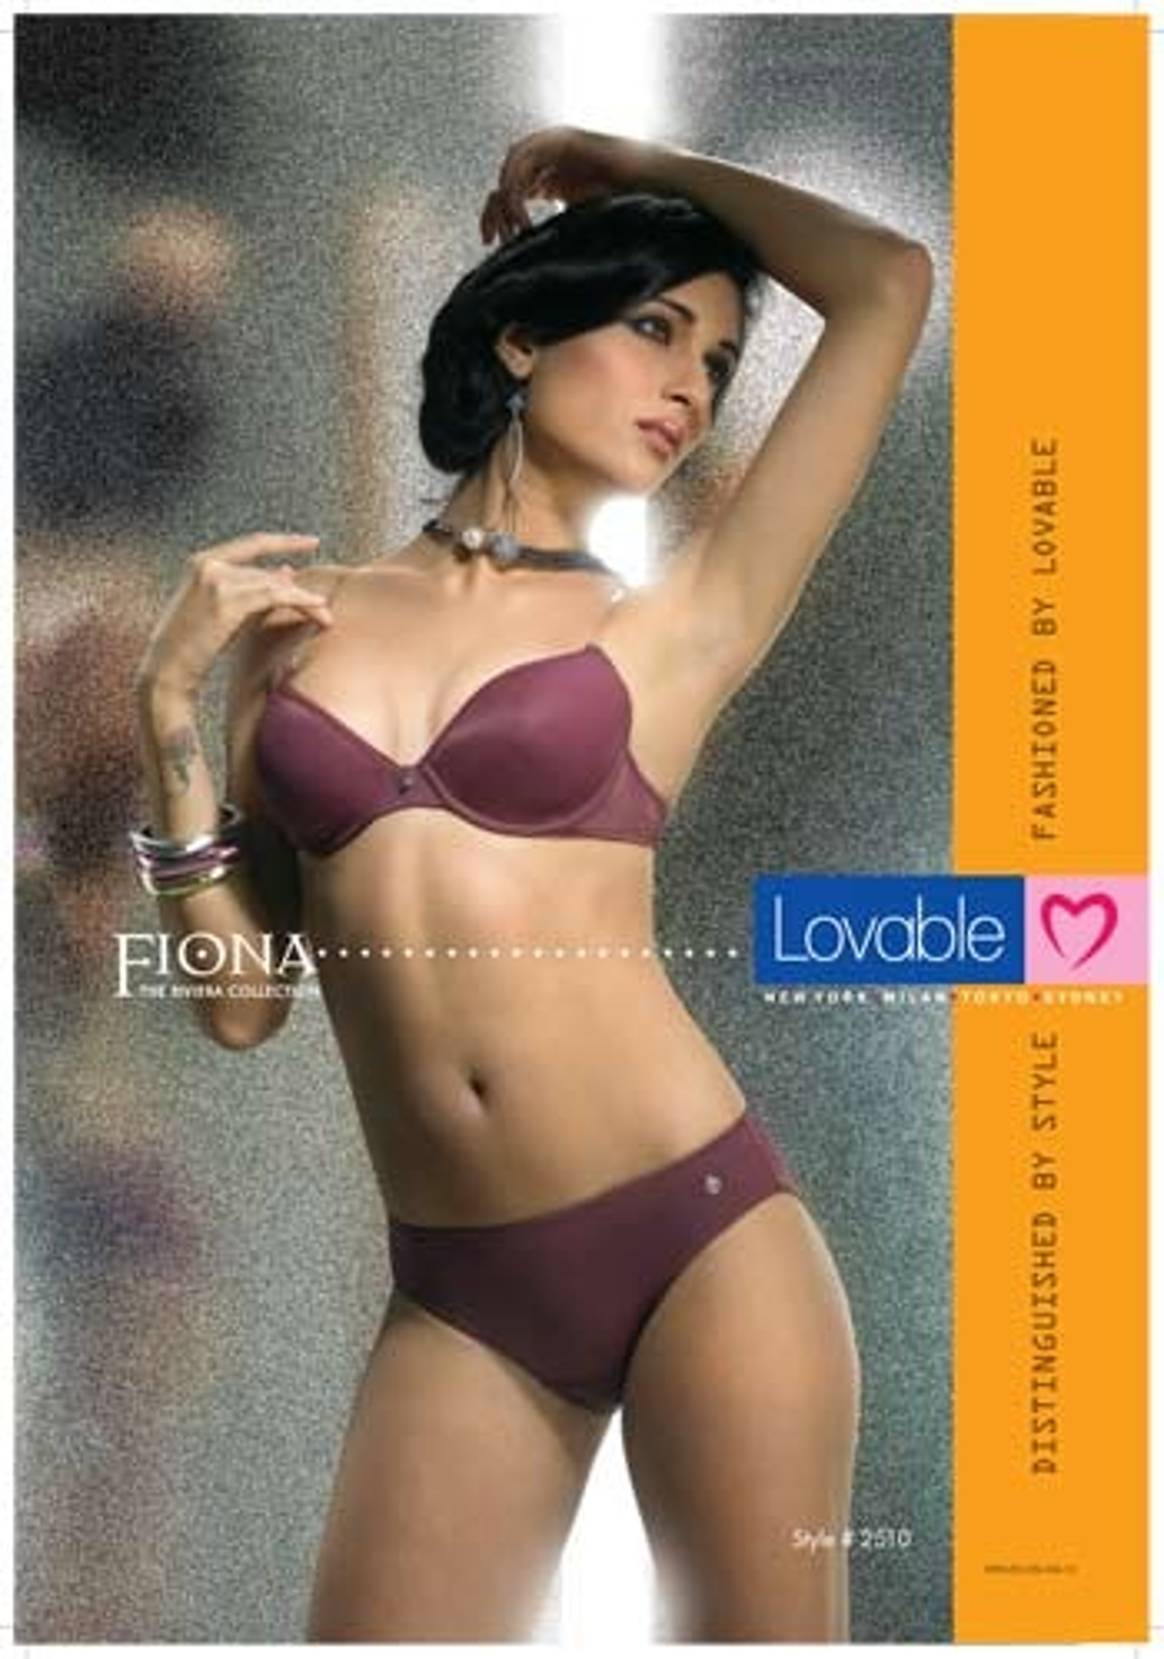 Lovable to introduce high-end foreign lingerie label in India